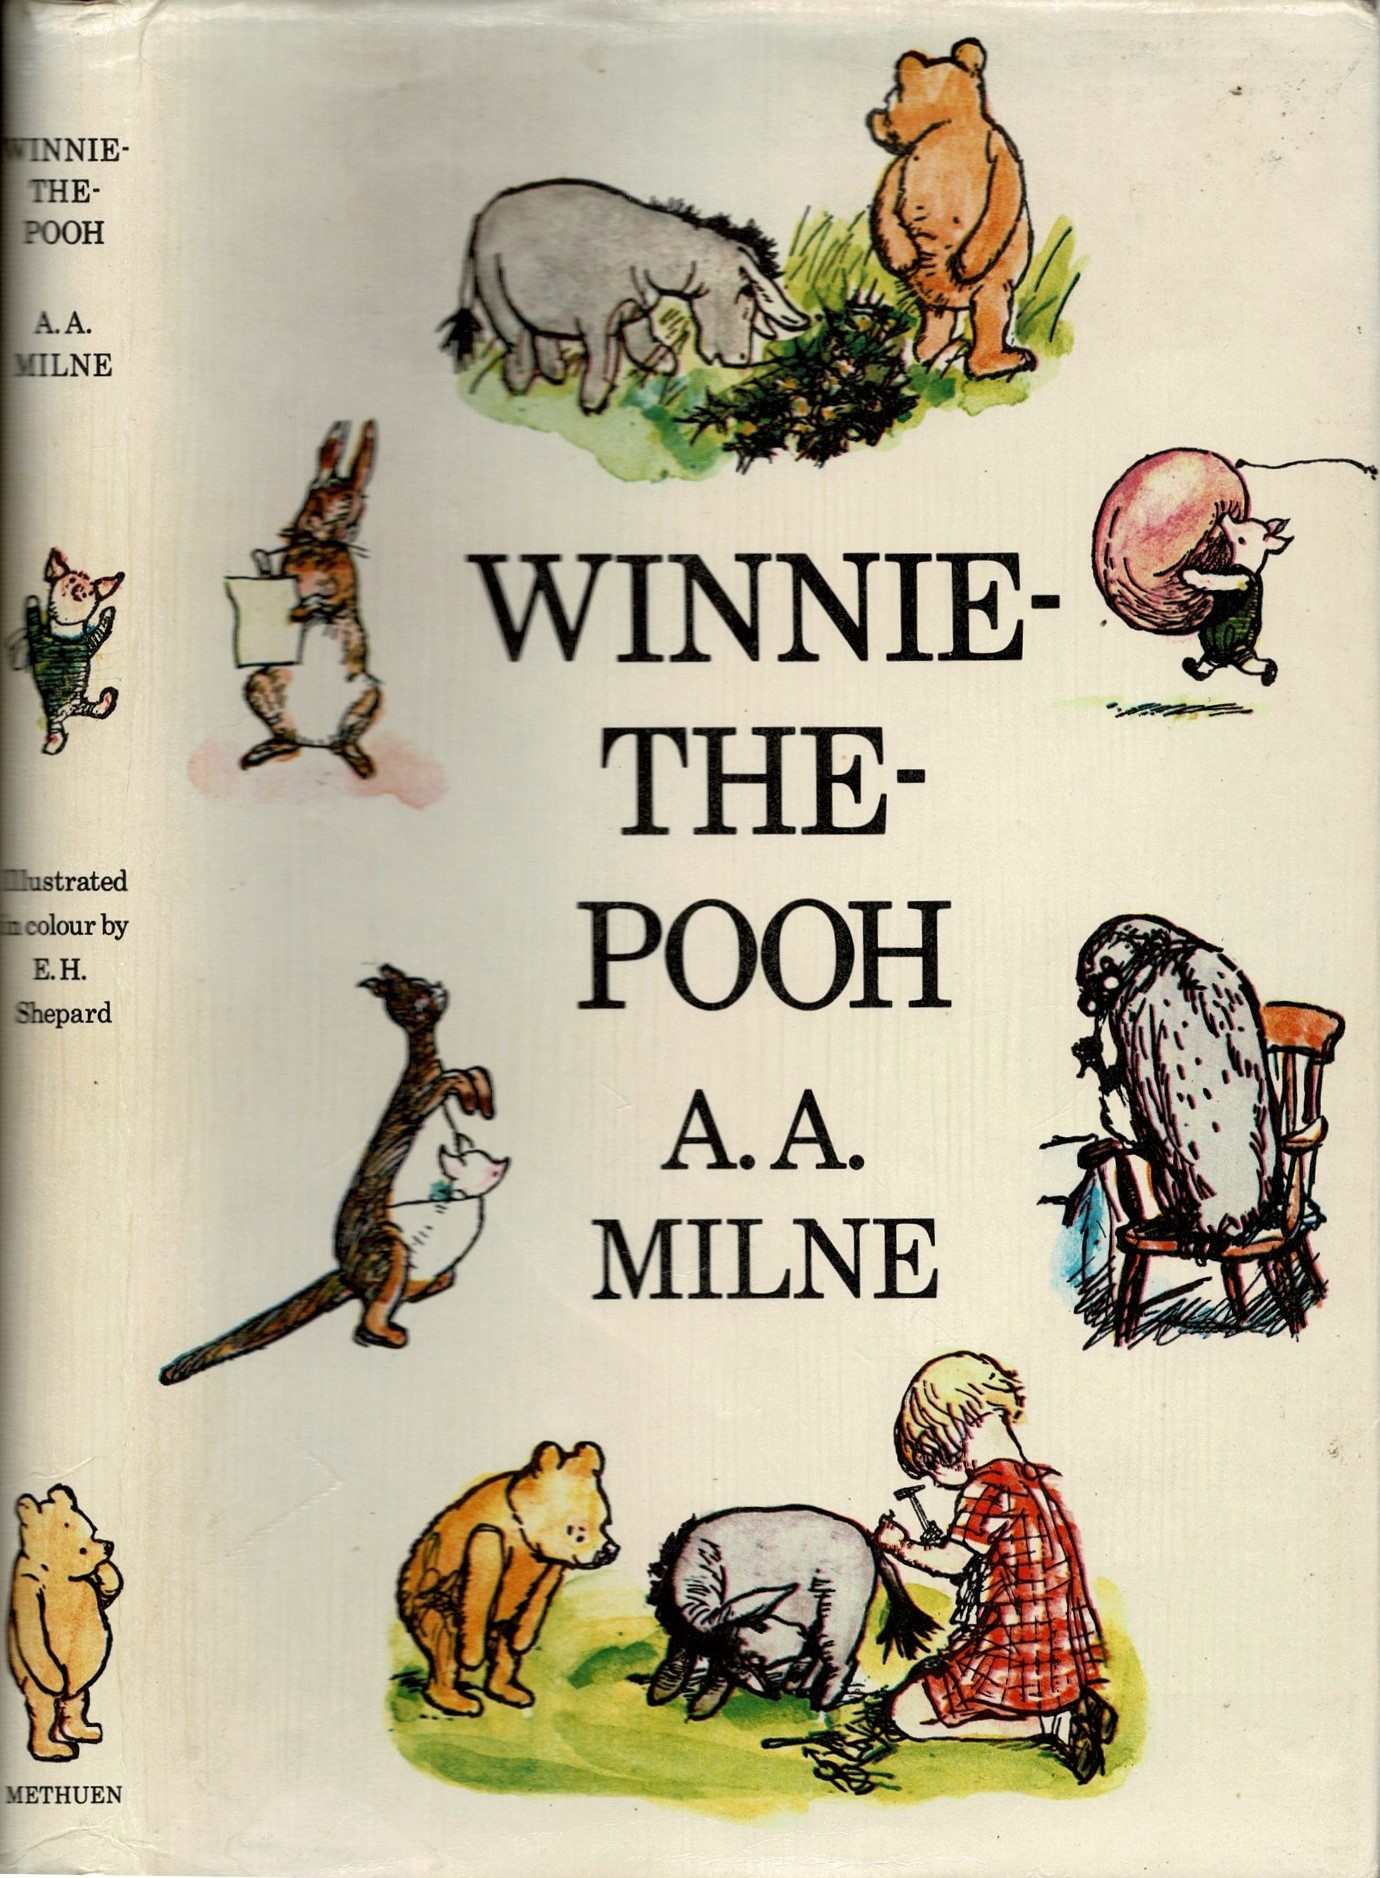 Winnie-the-Pooh by A. A Milne on Muir Books